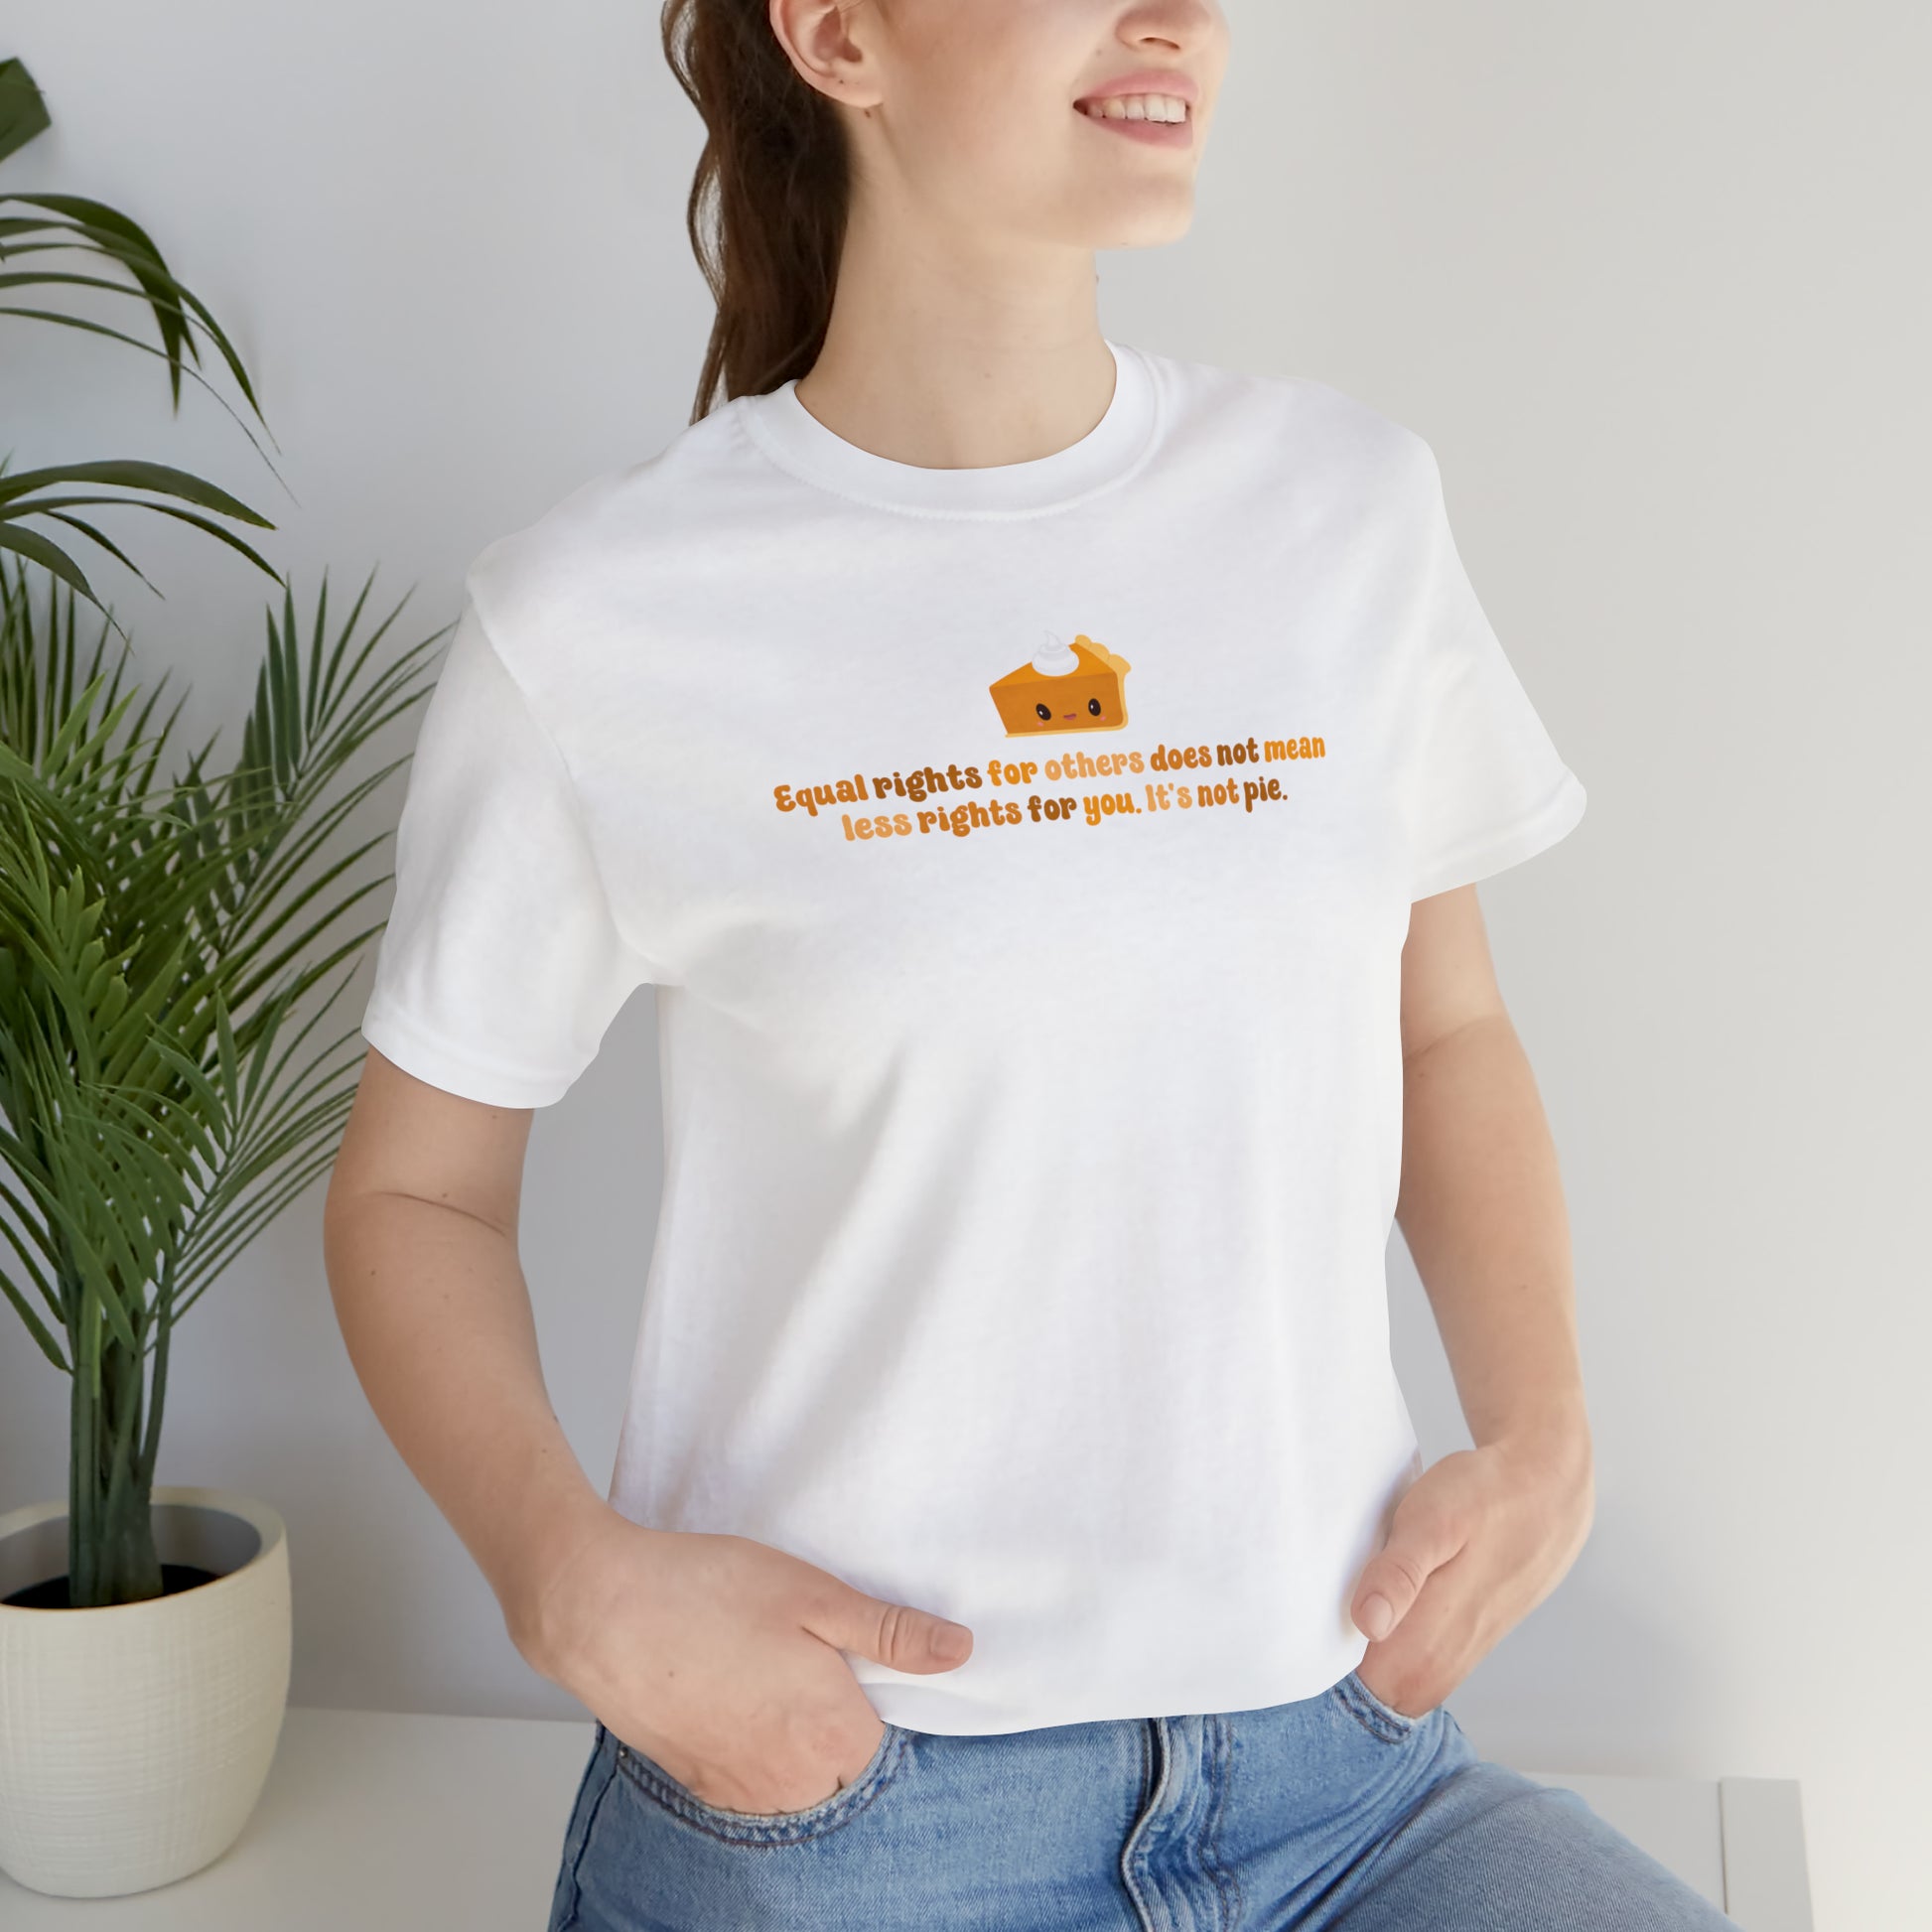 LGBT+ Pride Equality Pie T-Shirt - Embrace Your Diff